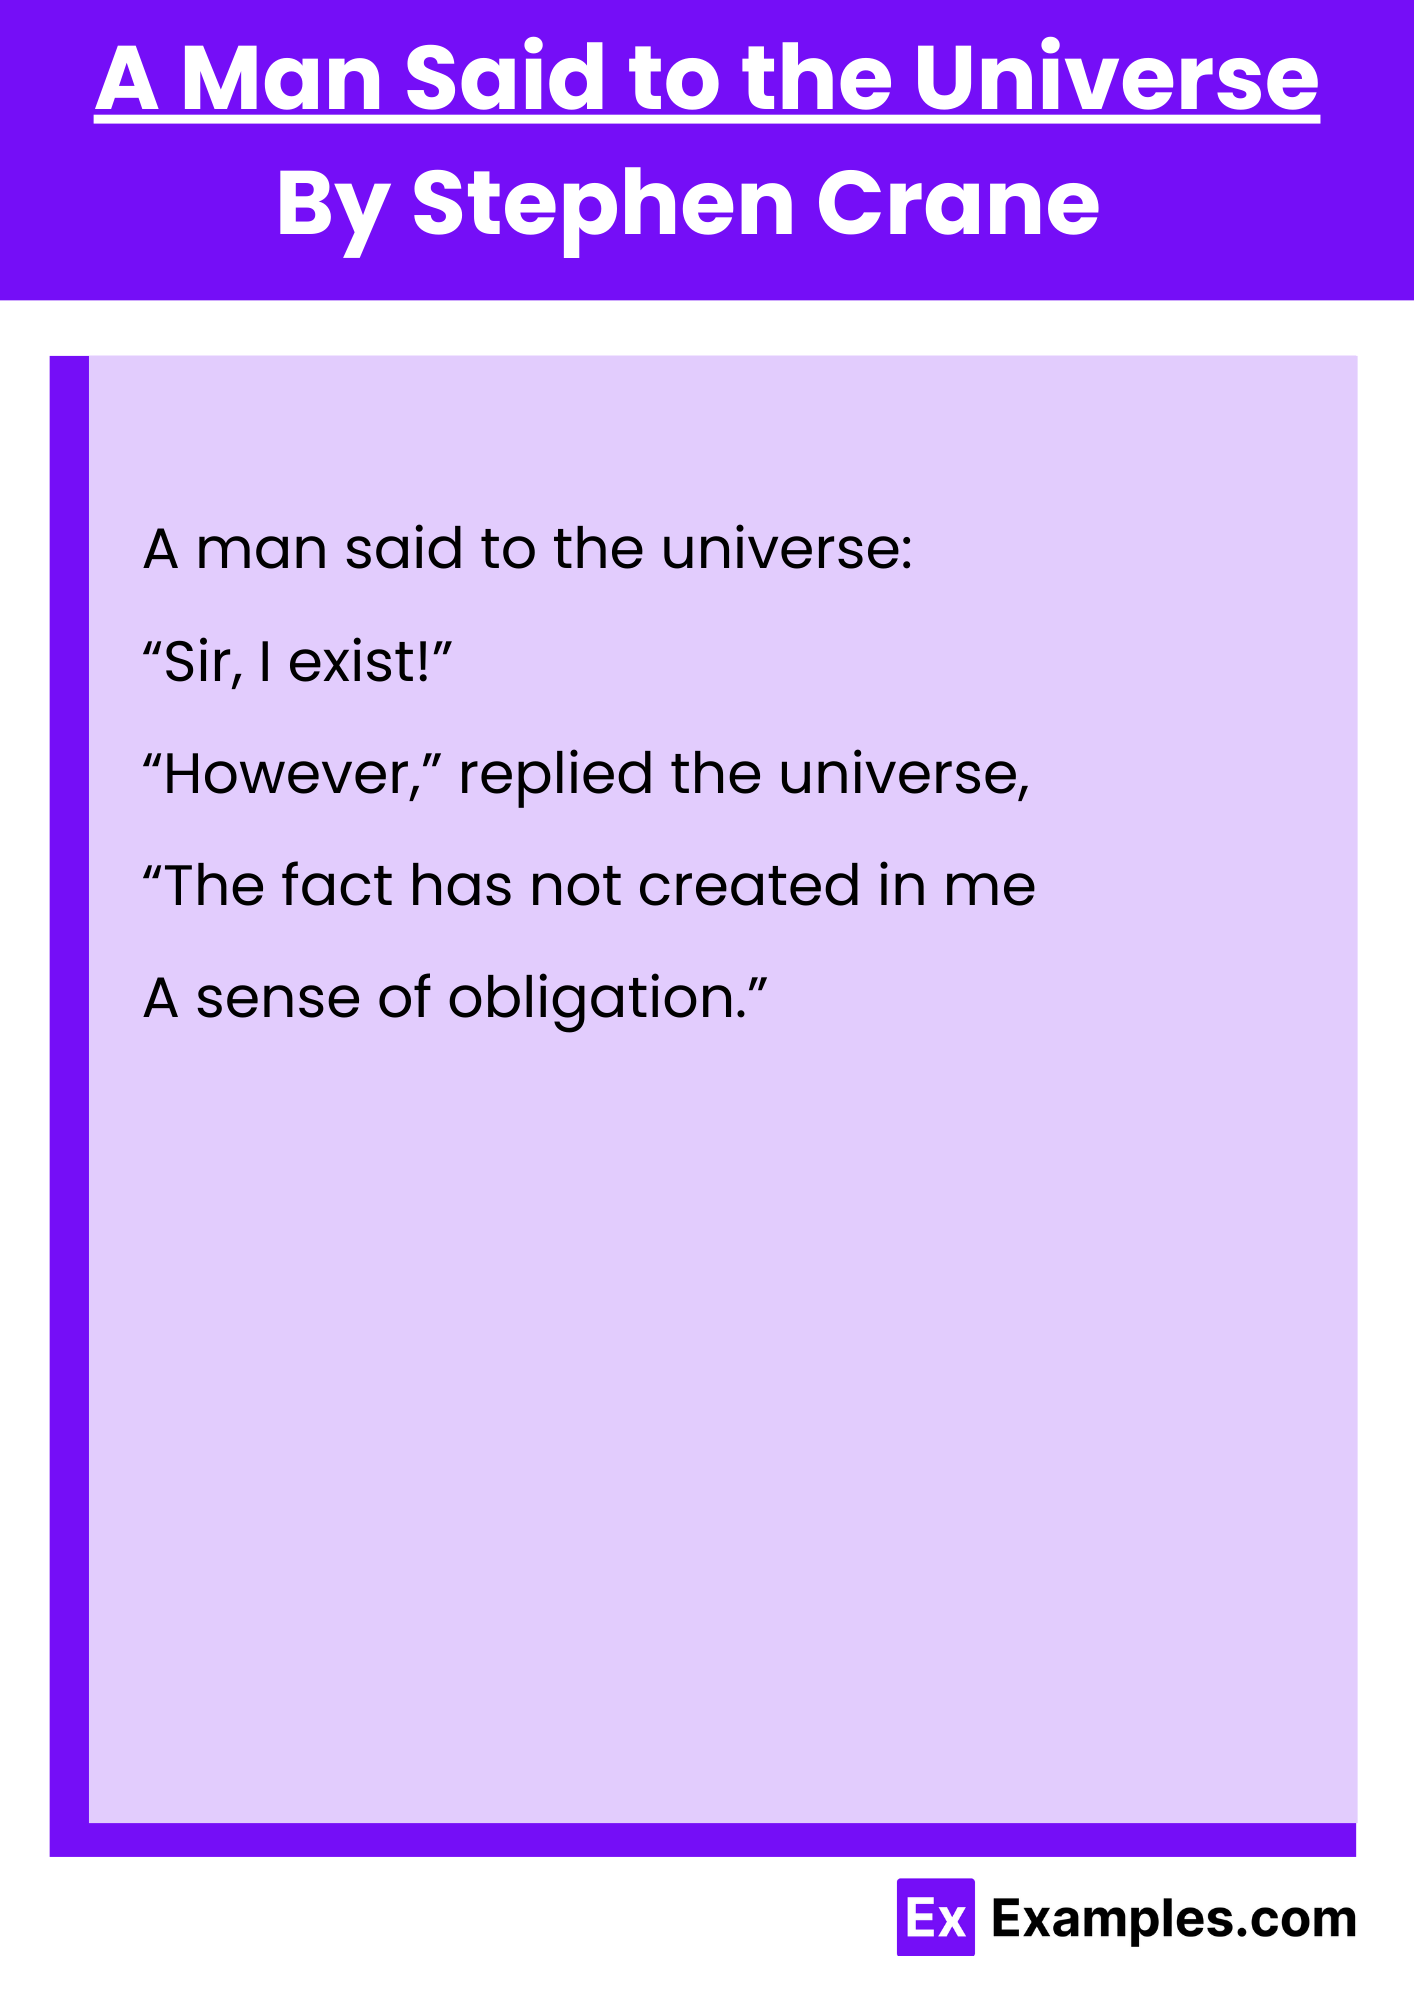 A Man Said to the Universe By Stephen Crane